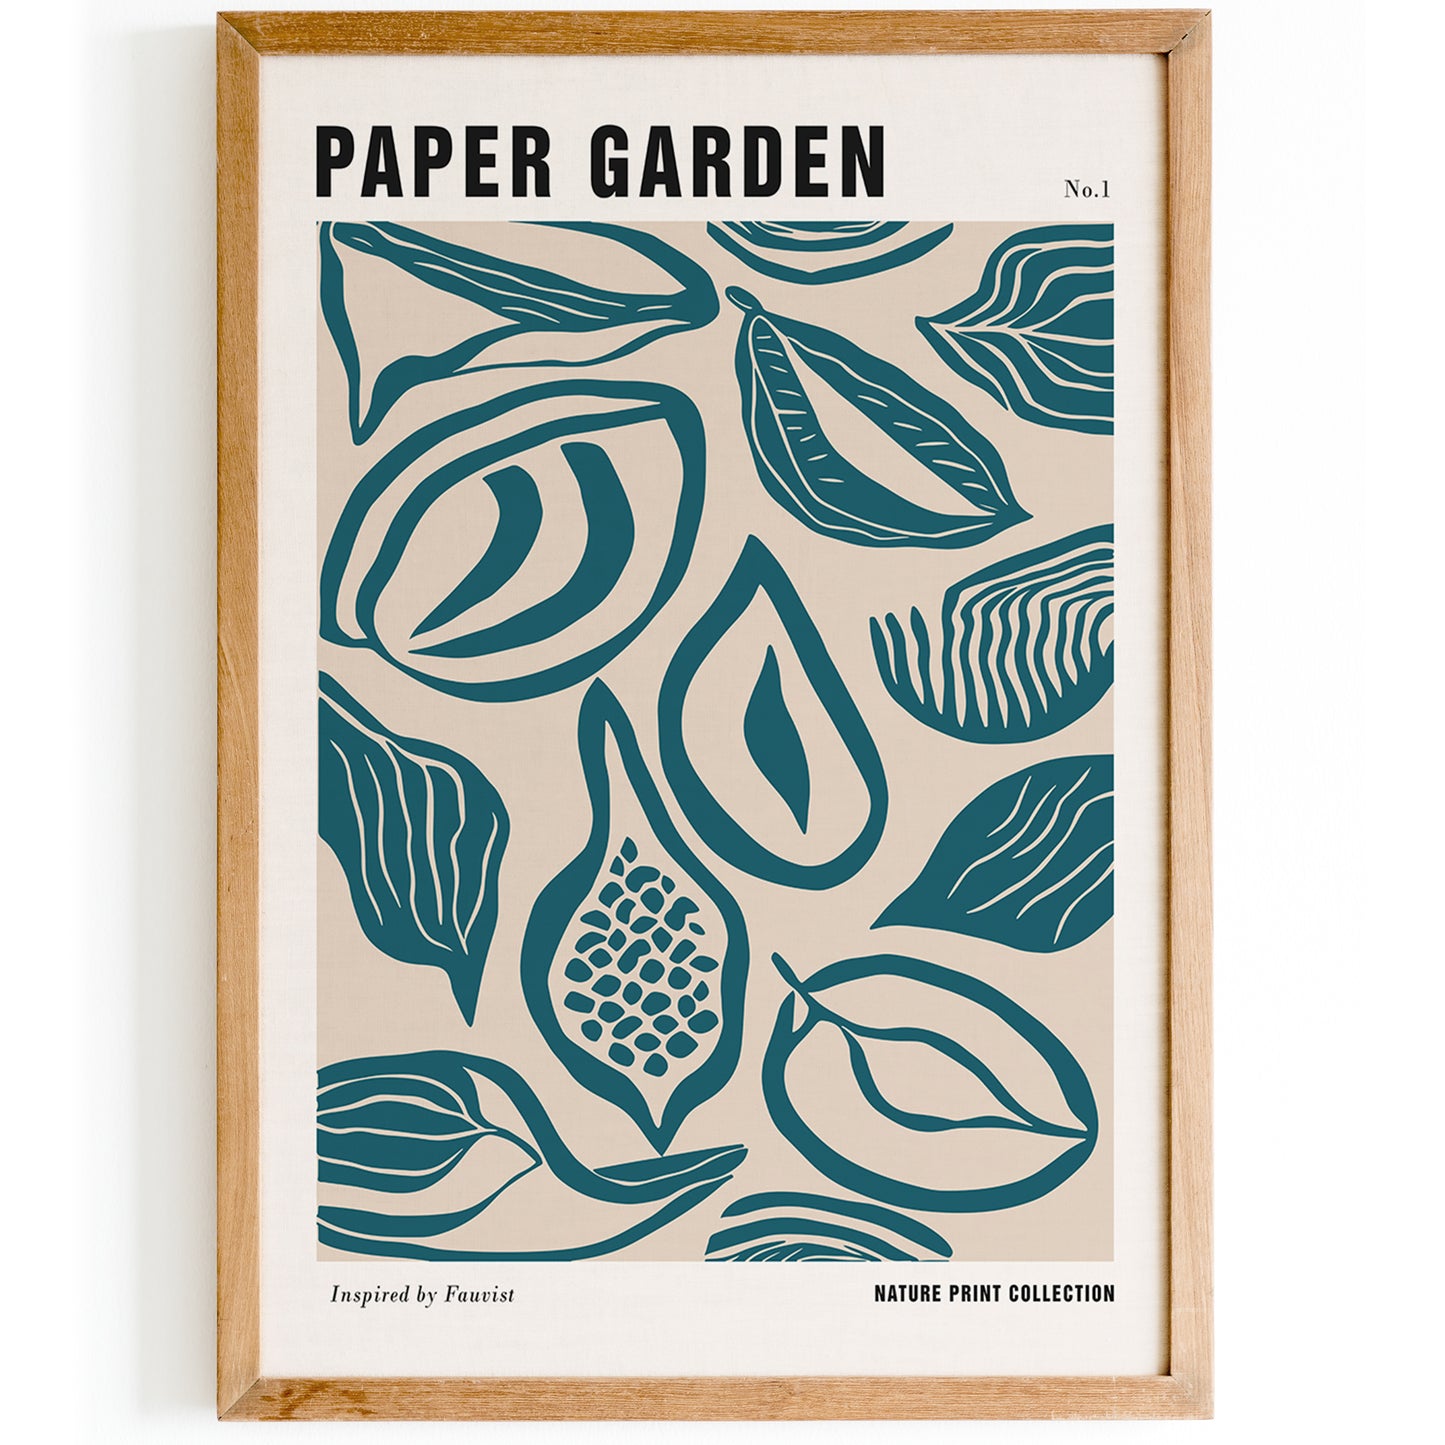 Paper Garden with Fruit Poster